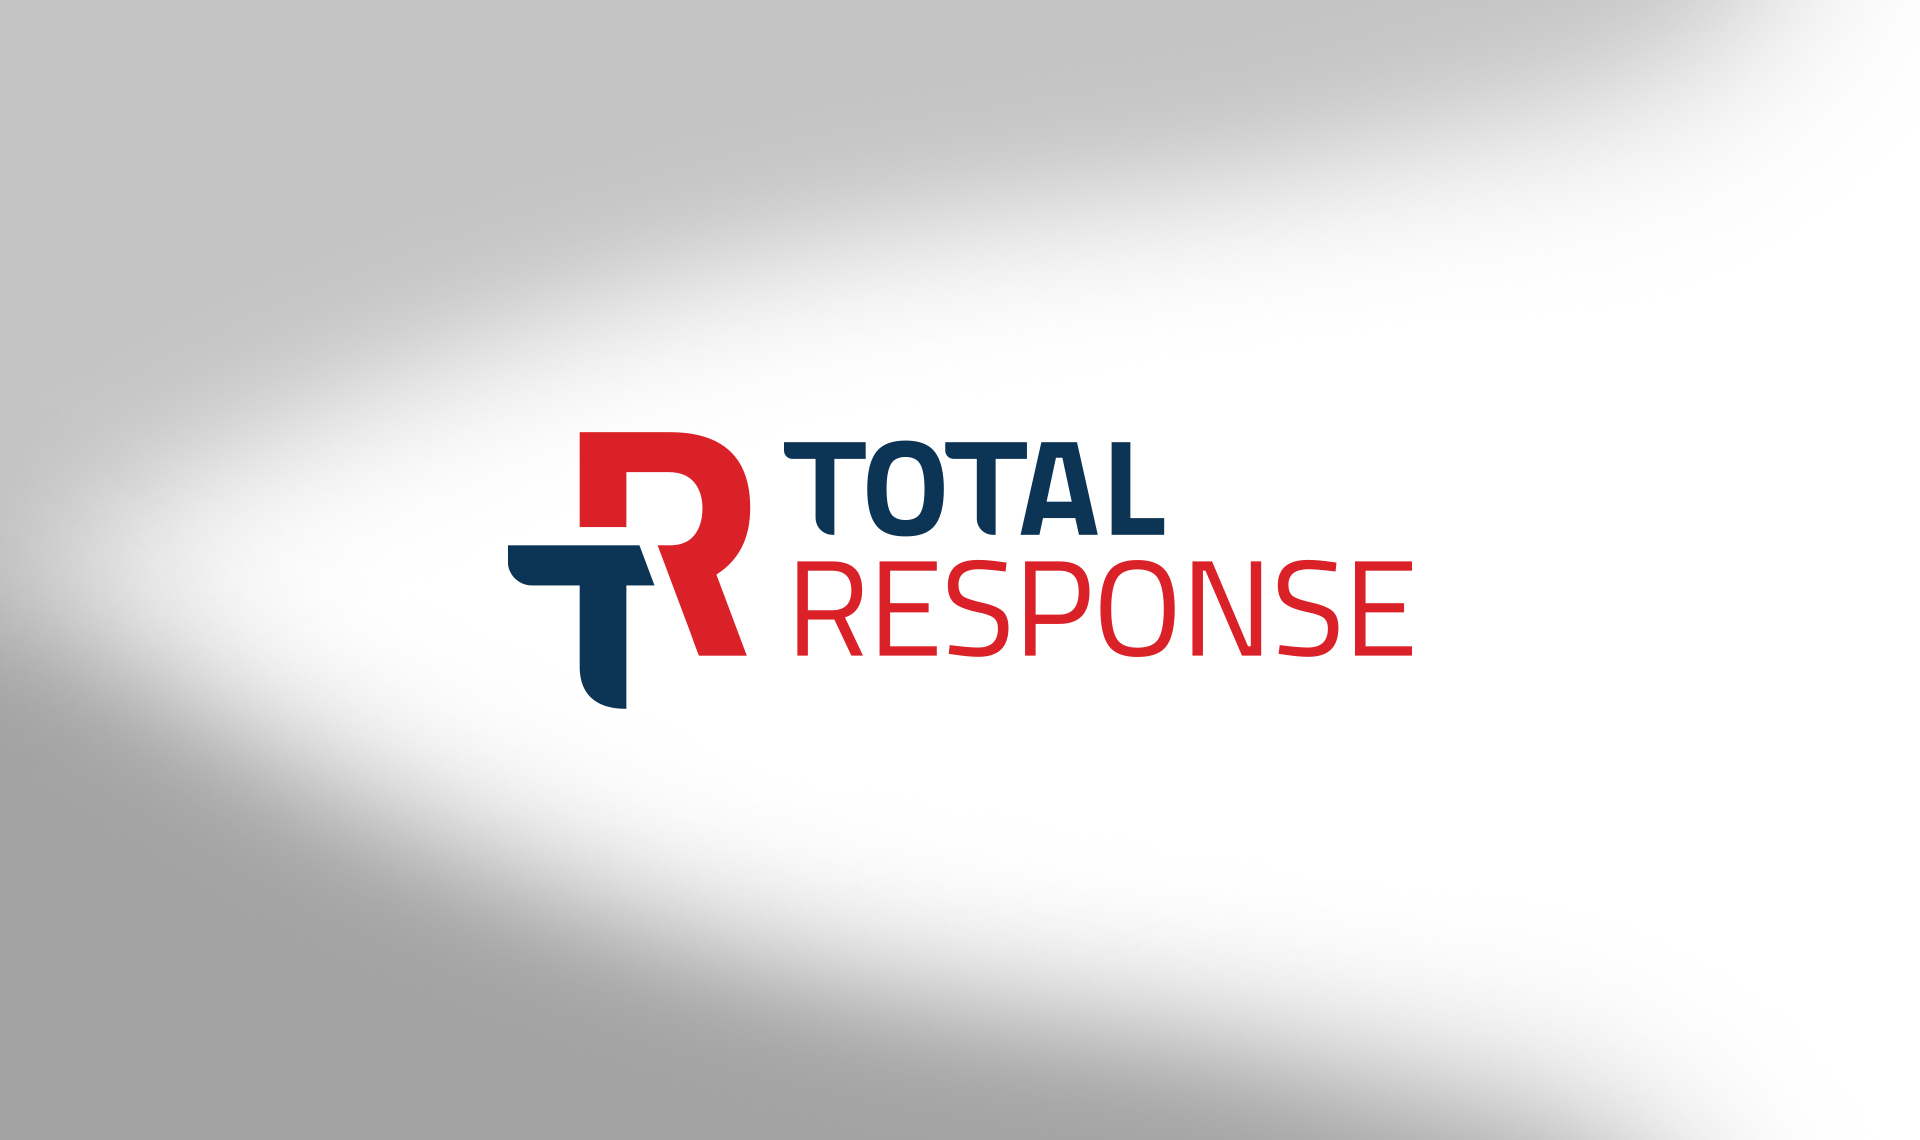 Total Response Transformed: A Modern Look for a Timeless Mission